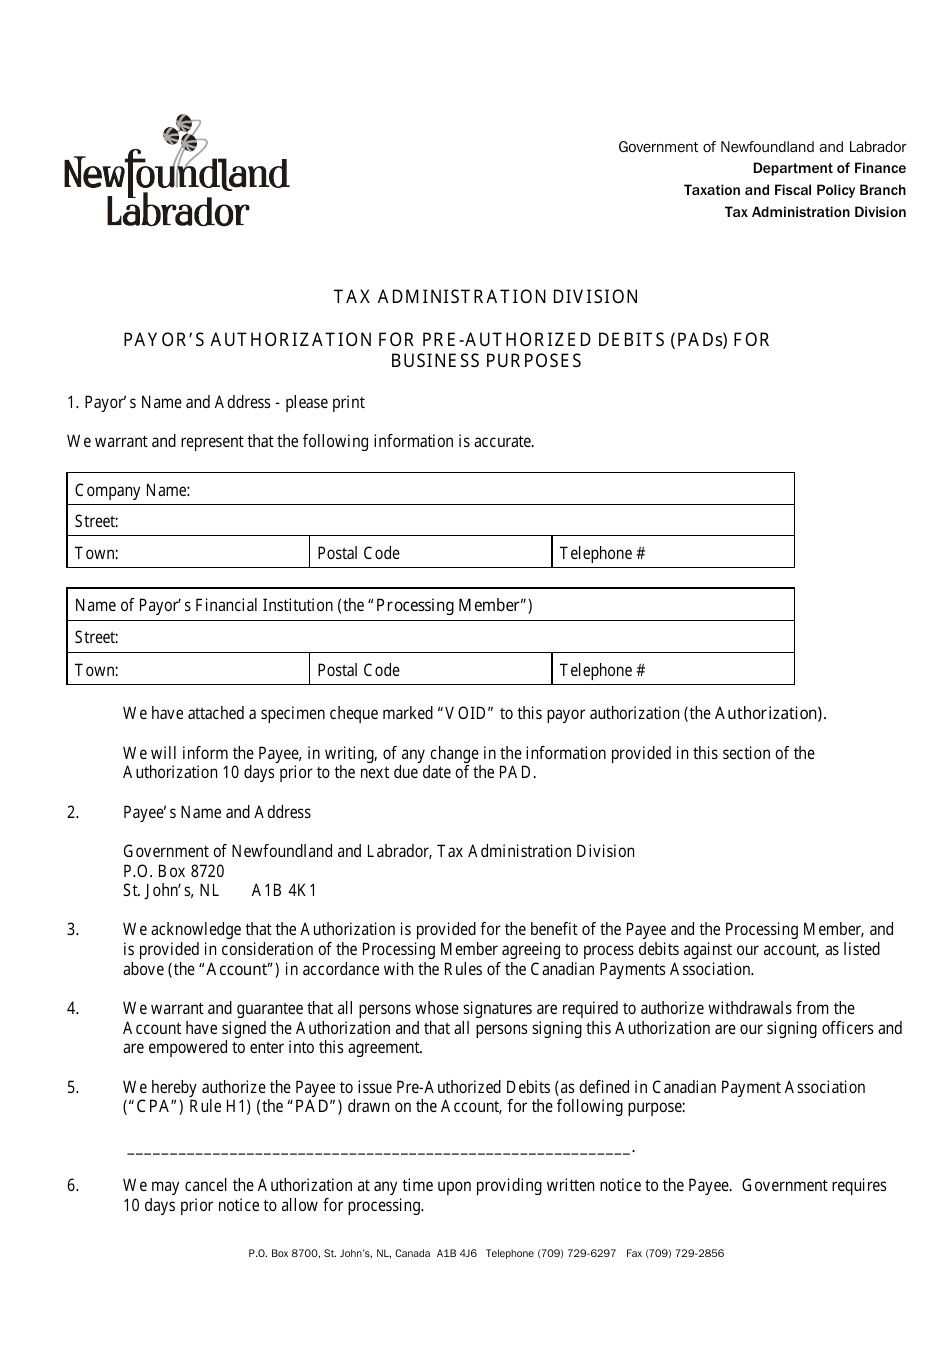 Payors Authorization for Pre-authorized Debits (Pads) for Business Purposes - Newfoundland and Labrador, Canada, Page 1